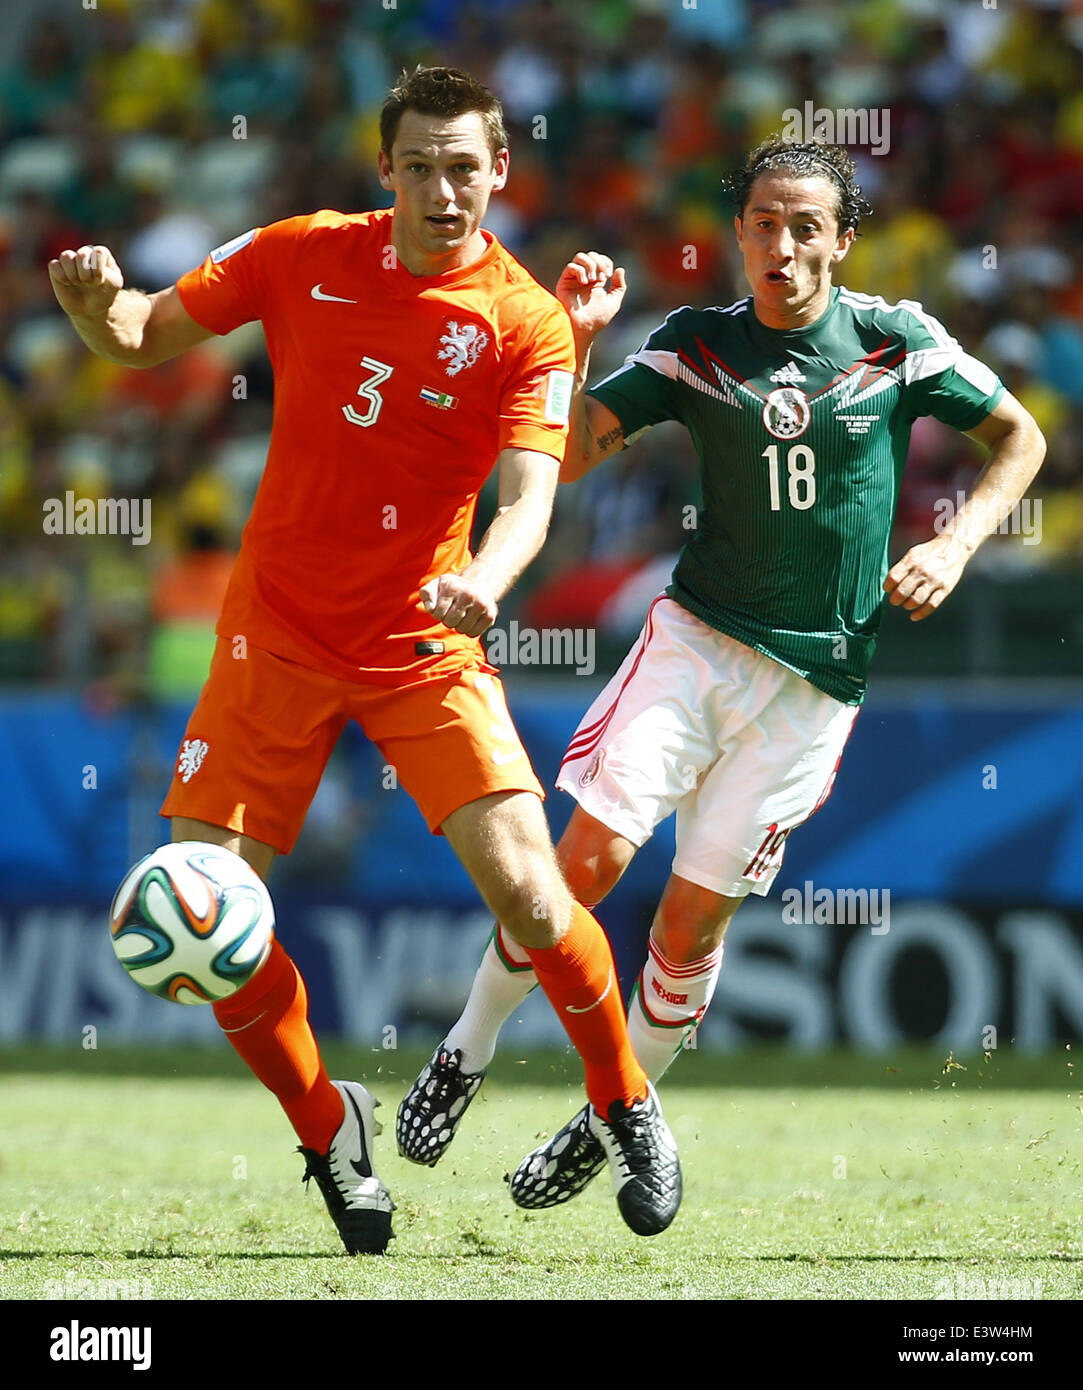 Fortaleza, Brazil. 29th June, 2014. Netherlands's Stefan de Vrij (L) vies with Mexico's Andres Guardado during a Round of 16 match between Netherlands and Mexico of 2014 FIFA World Cup at the Estadio Castelao Stadium in Fortaleza, Brazil, on June 29, 2014. Credit:  Chen Jianli/Xinhua/Alamy Live News Stock Photo